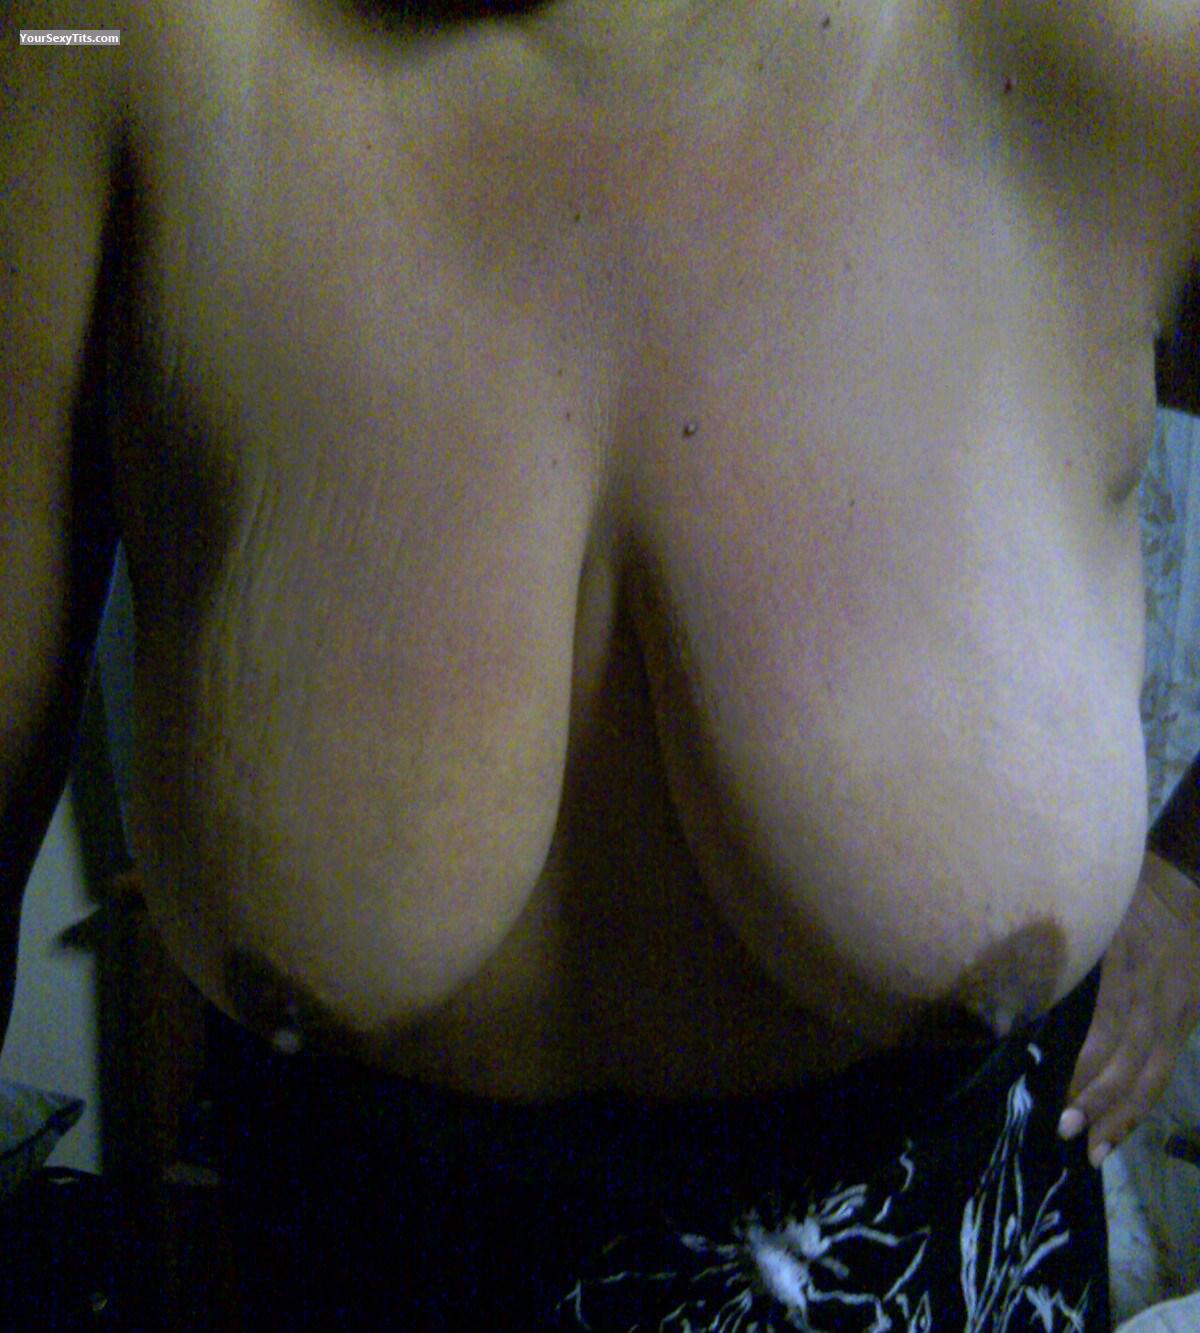 Tit Flash: Very Big Tits - Brown Beauty from United States